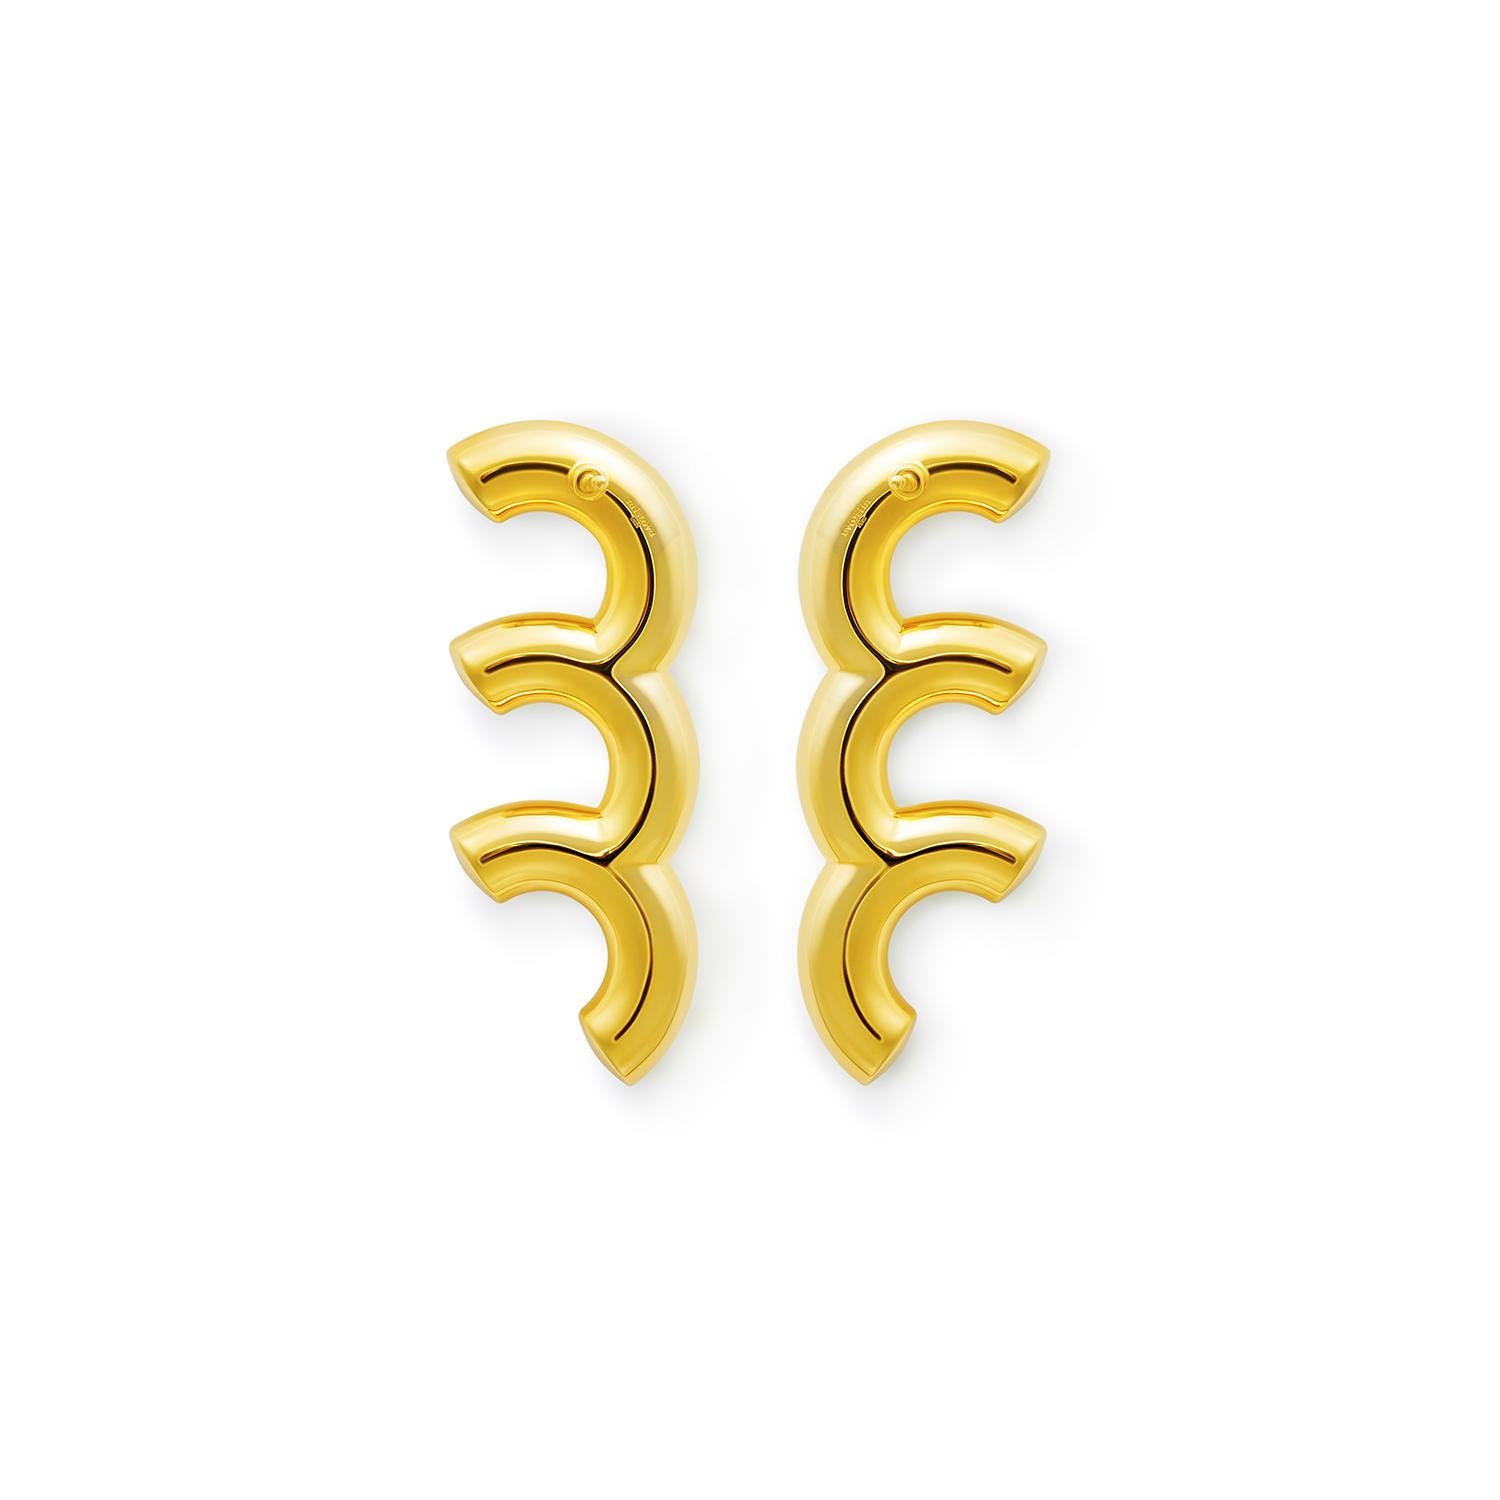 Mistova's Leap Earrings are a strong modernist statement piece. Easy to wear made from high quality 18k gold. The fluid and organic shape brings to mind all the beauty and curiosities living in our oceans.